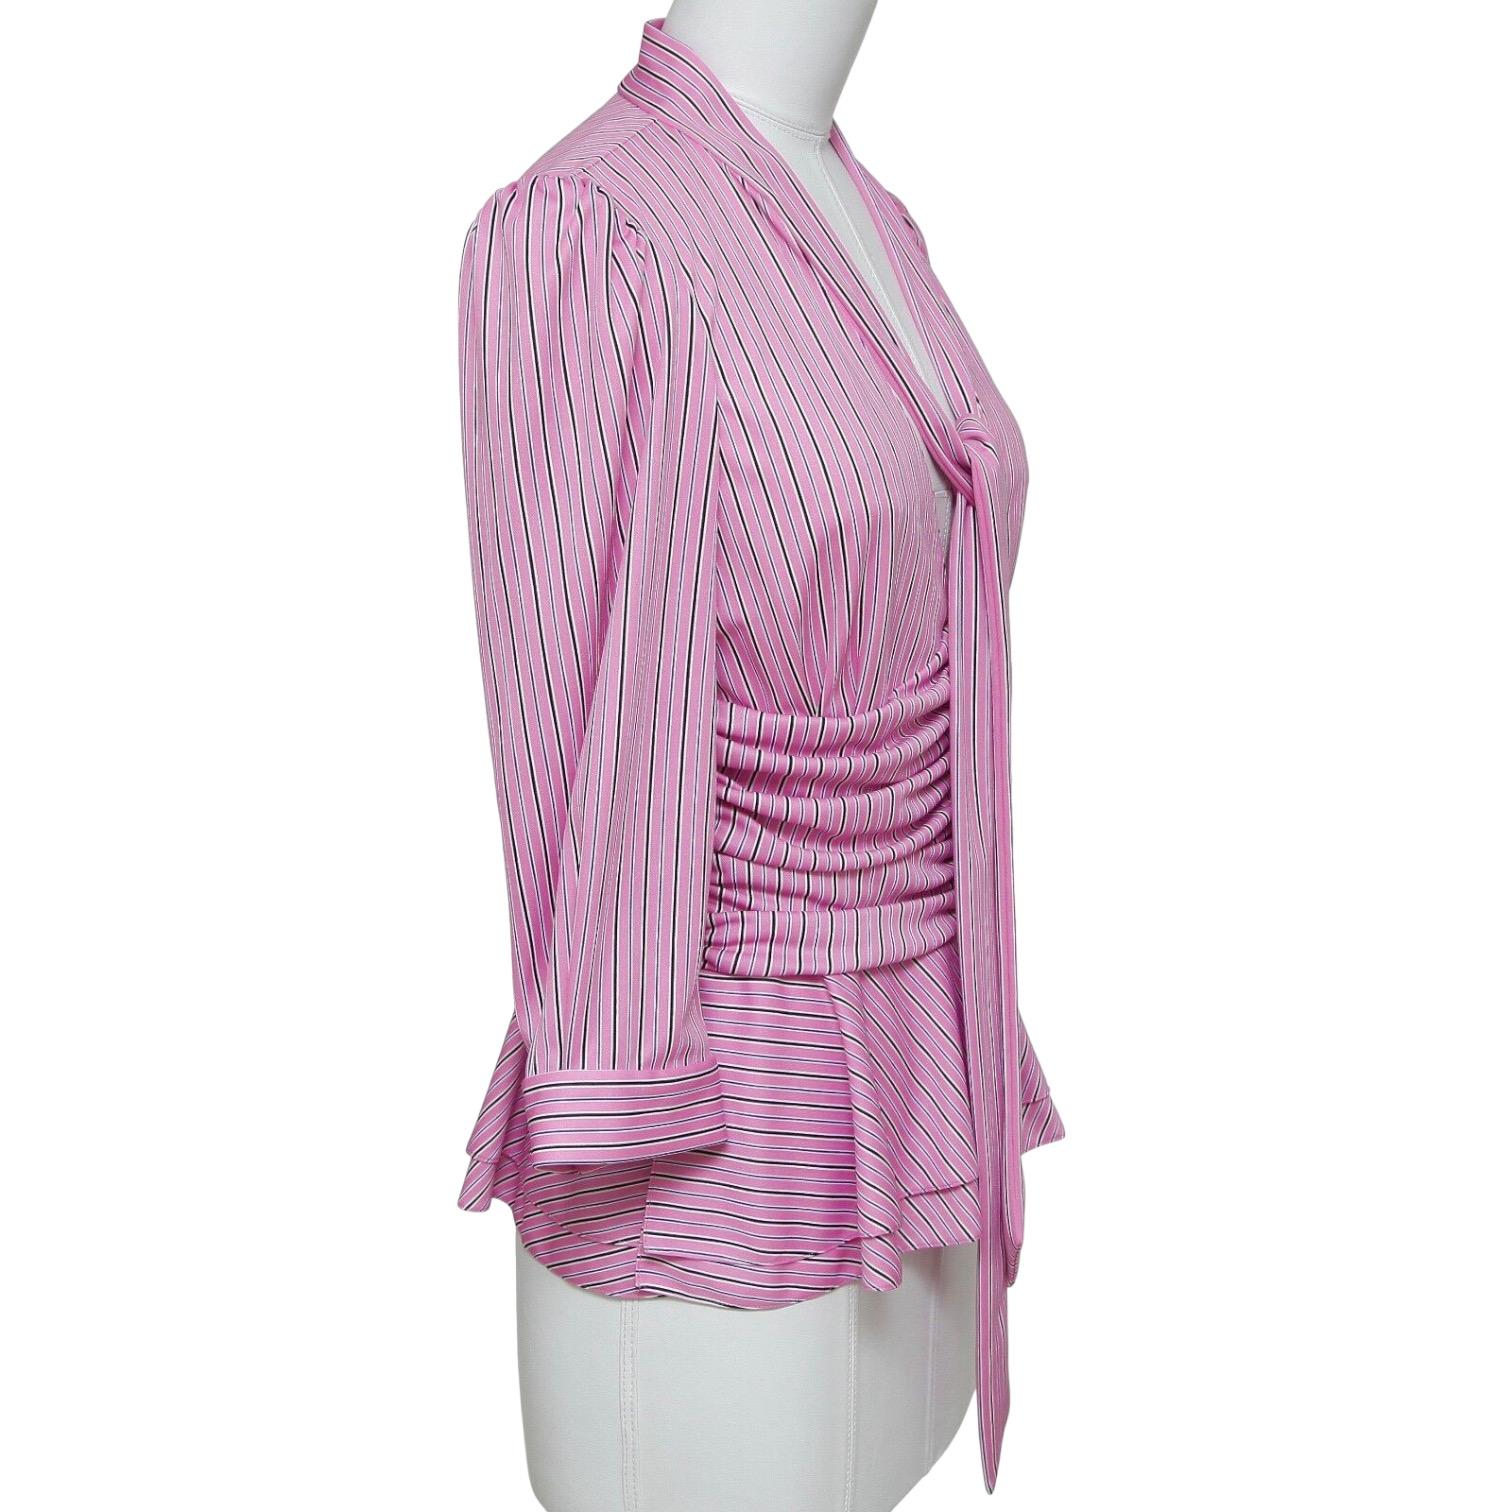 GUARANTEED AUTHENTIC BALENCIAGA STRIPED 3/4 SLEEVE BLOUSE

Retailed excluding sales taxes $1,195

Design:
- Striped blouse in beautiful rose, white and black colors.
- Attached neck tie.
- 3/4 sleeves with self covered buttons.
- Pleating across